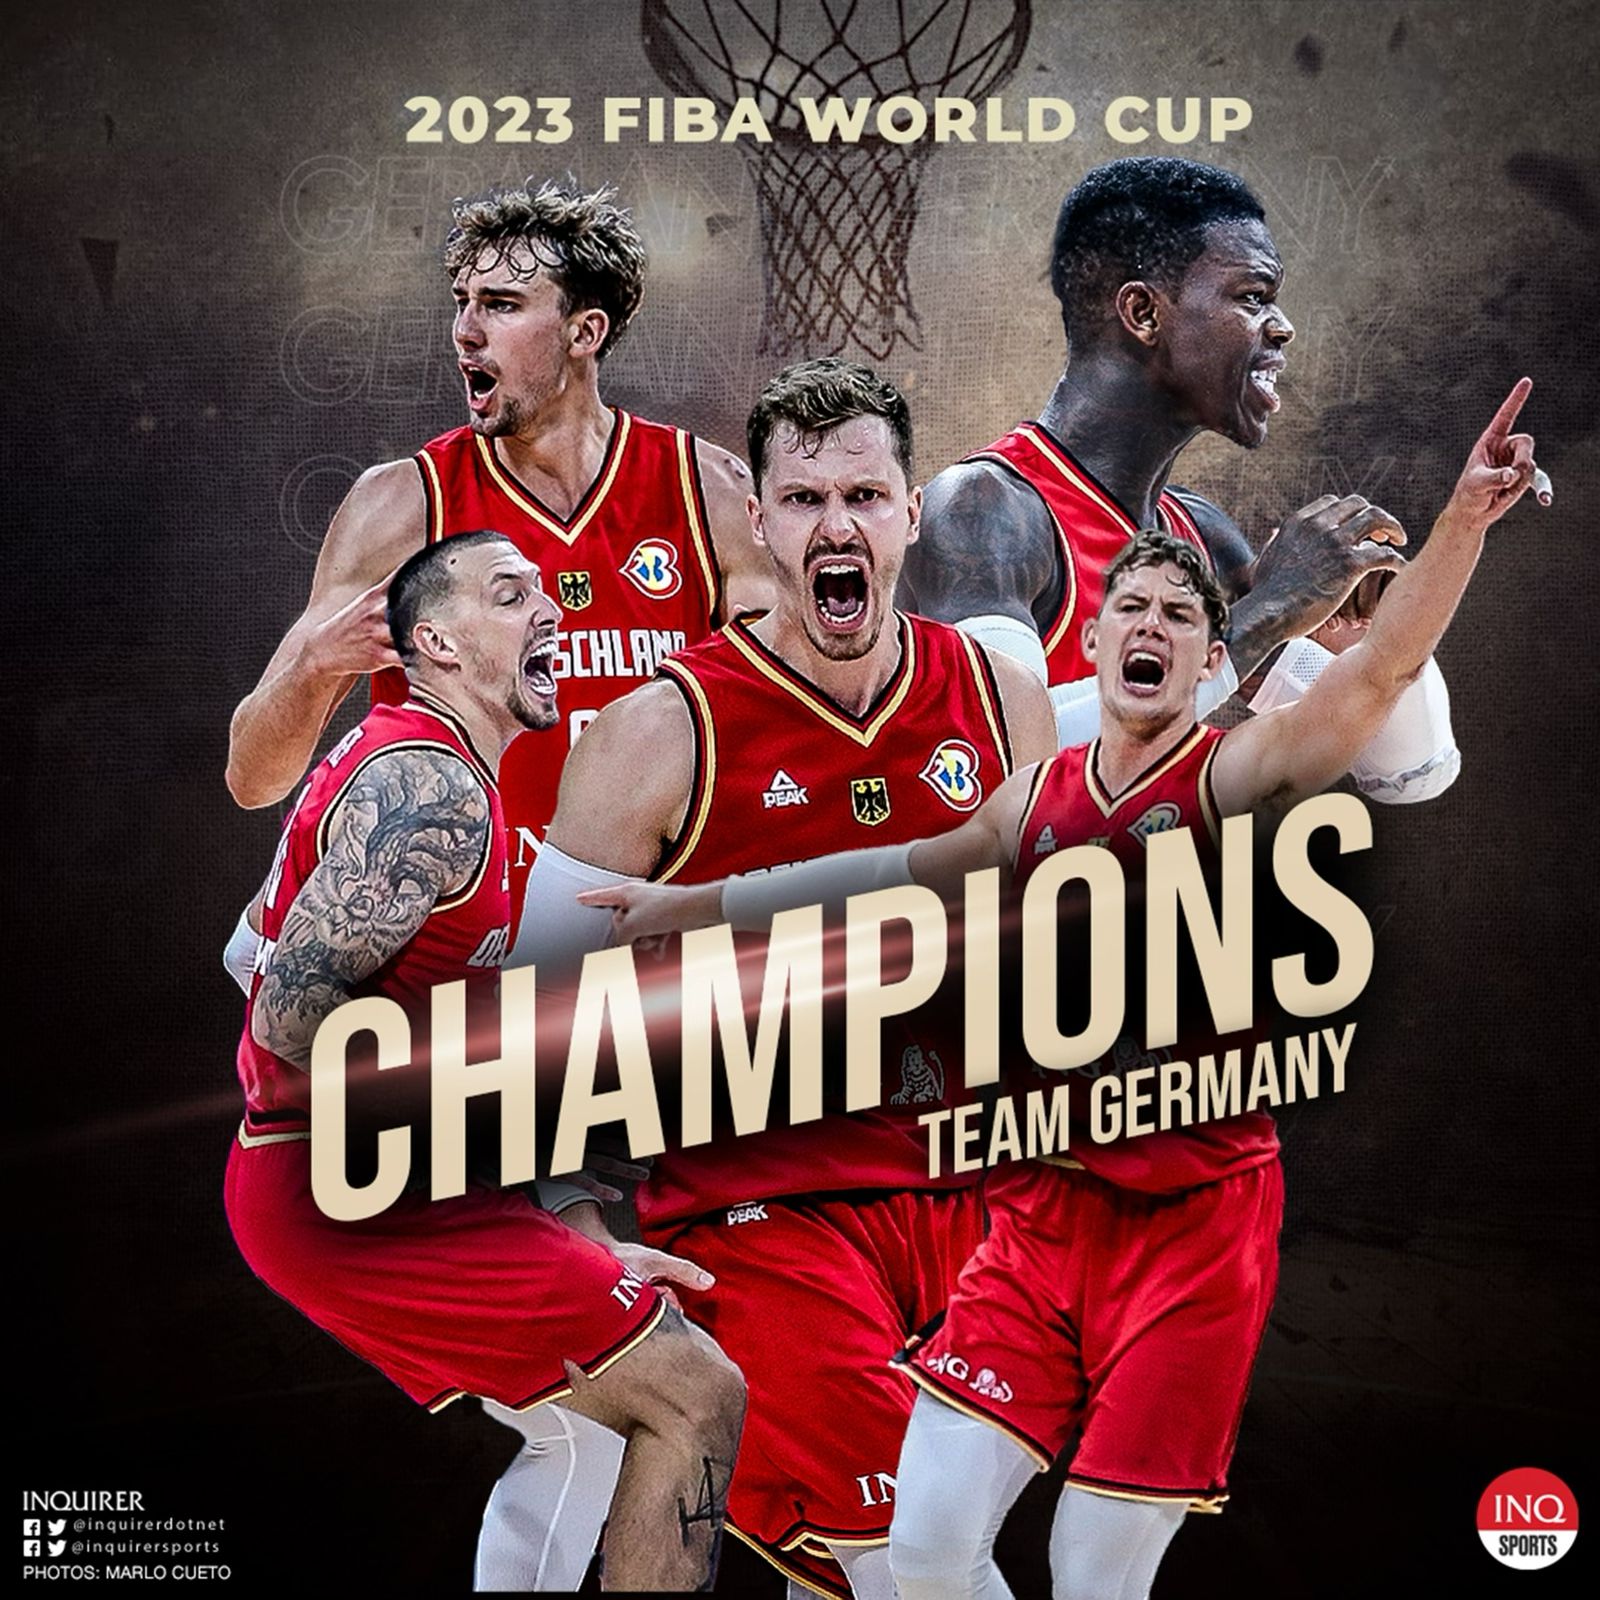 Germany is the Fiba World Cup 2023 champion.